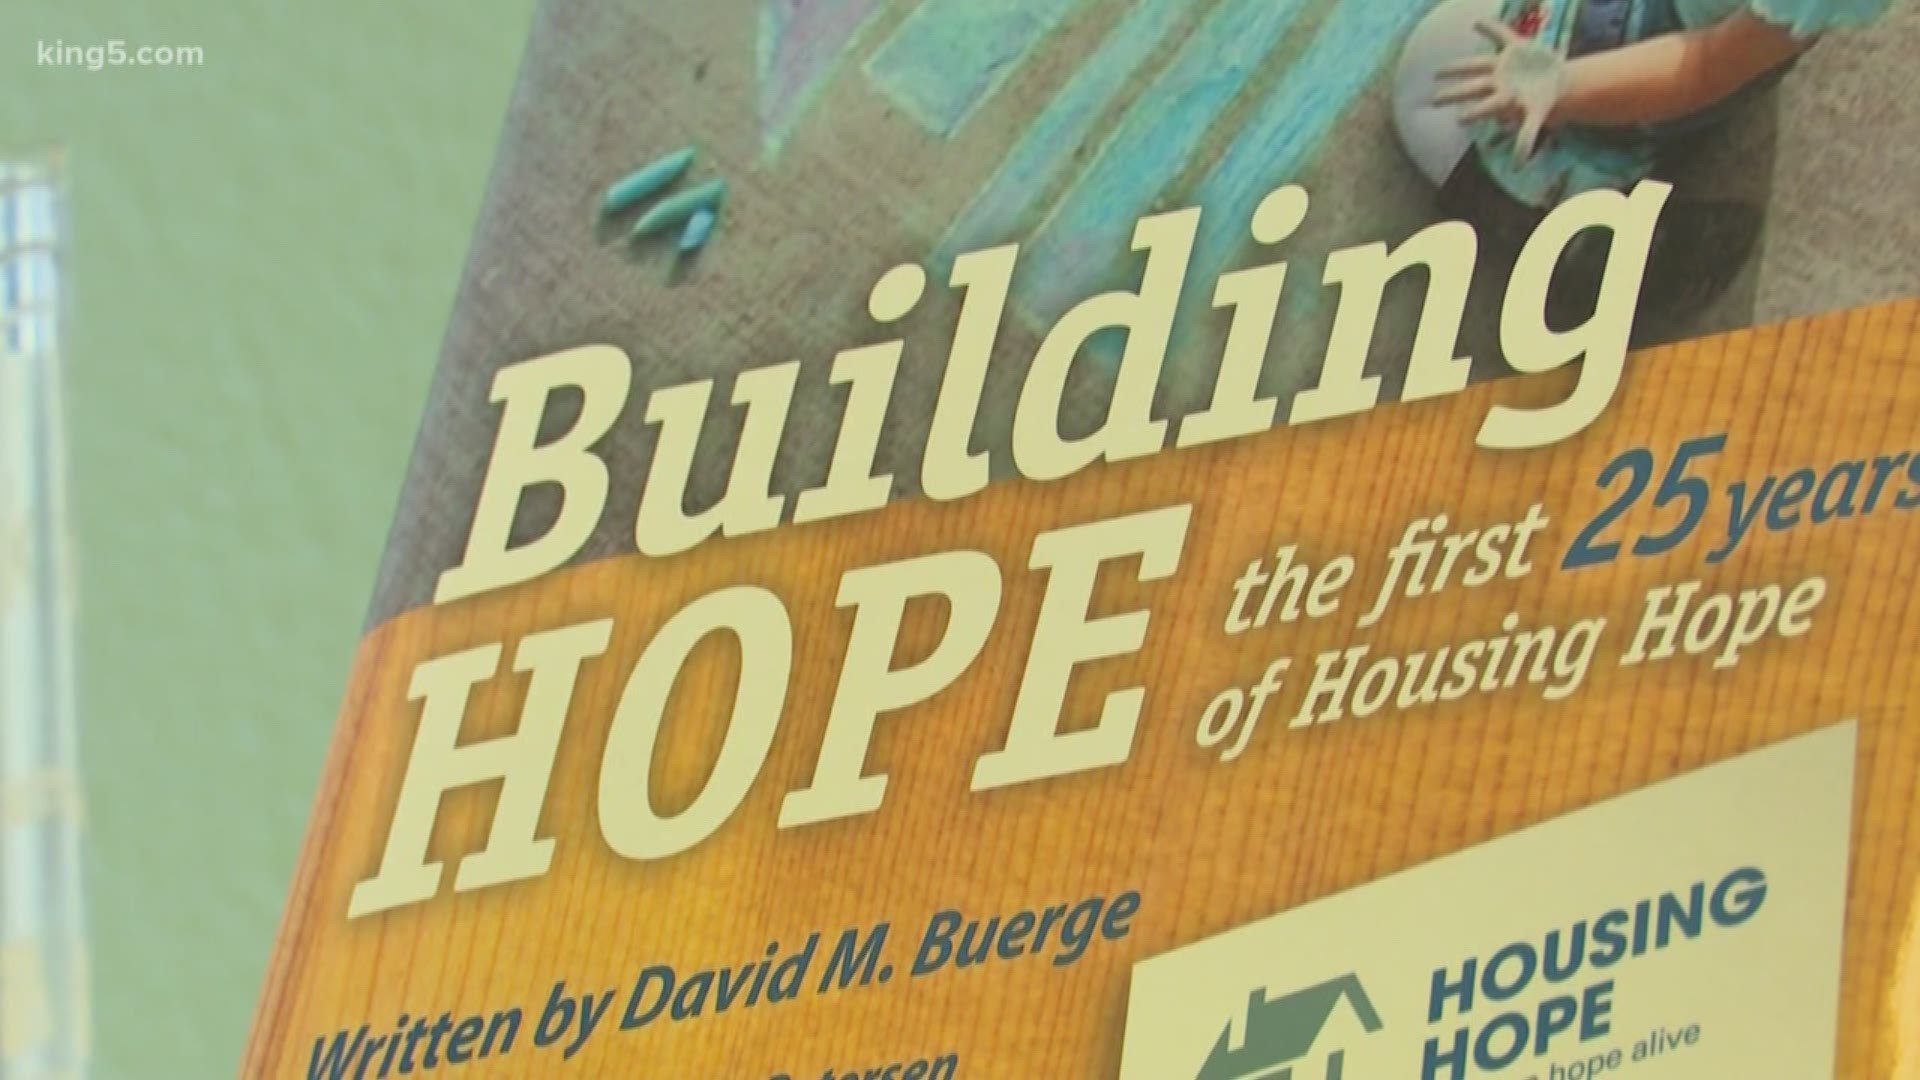 Everett School District leases land to build housing for homeless students, families. KING 5's Kalie Greenberg reports.